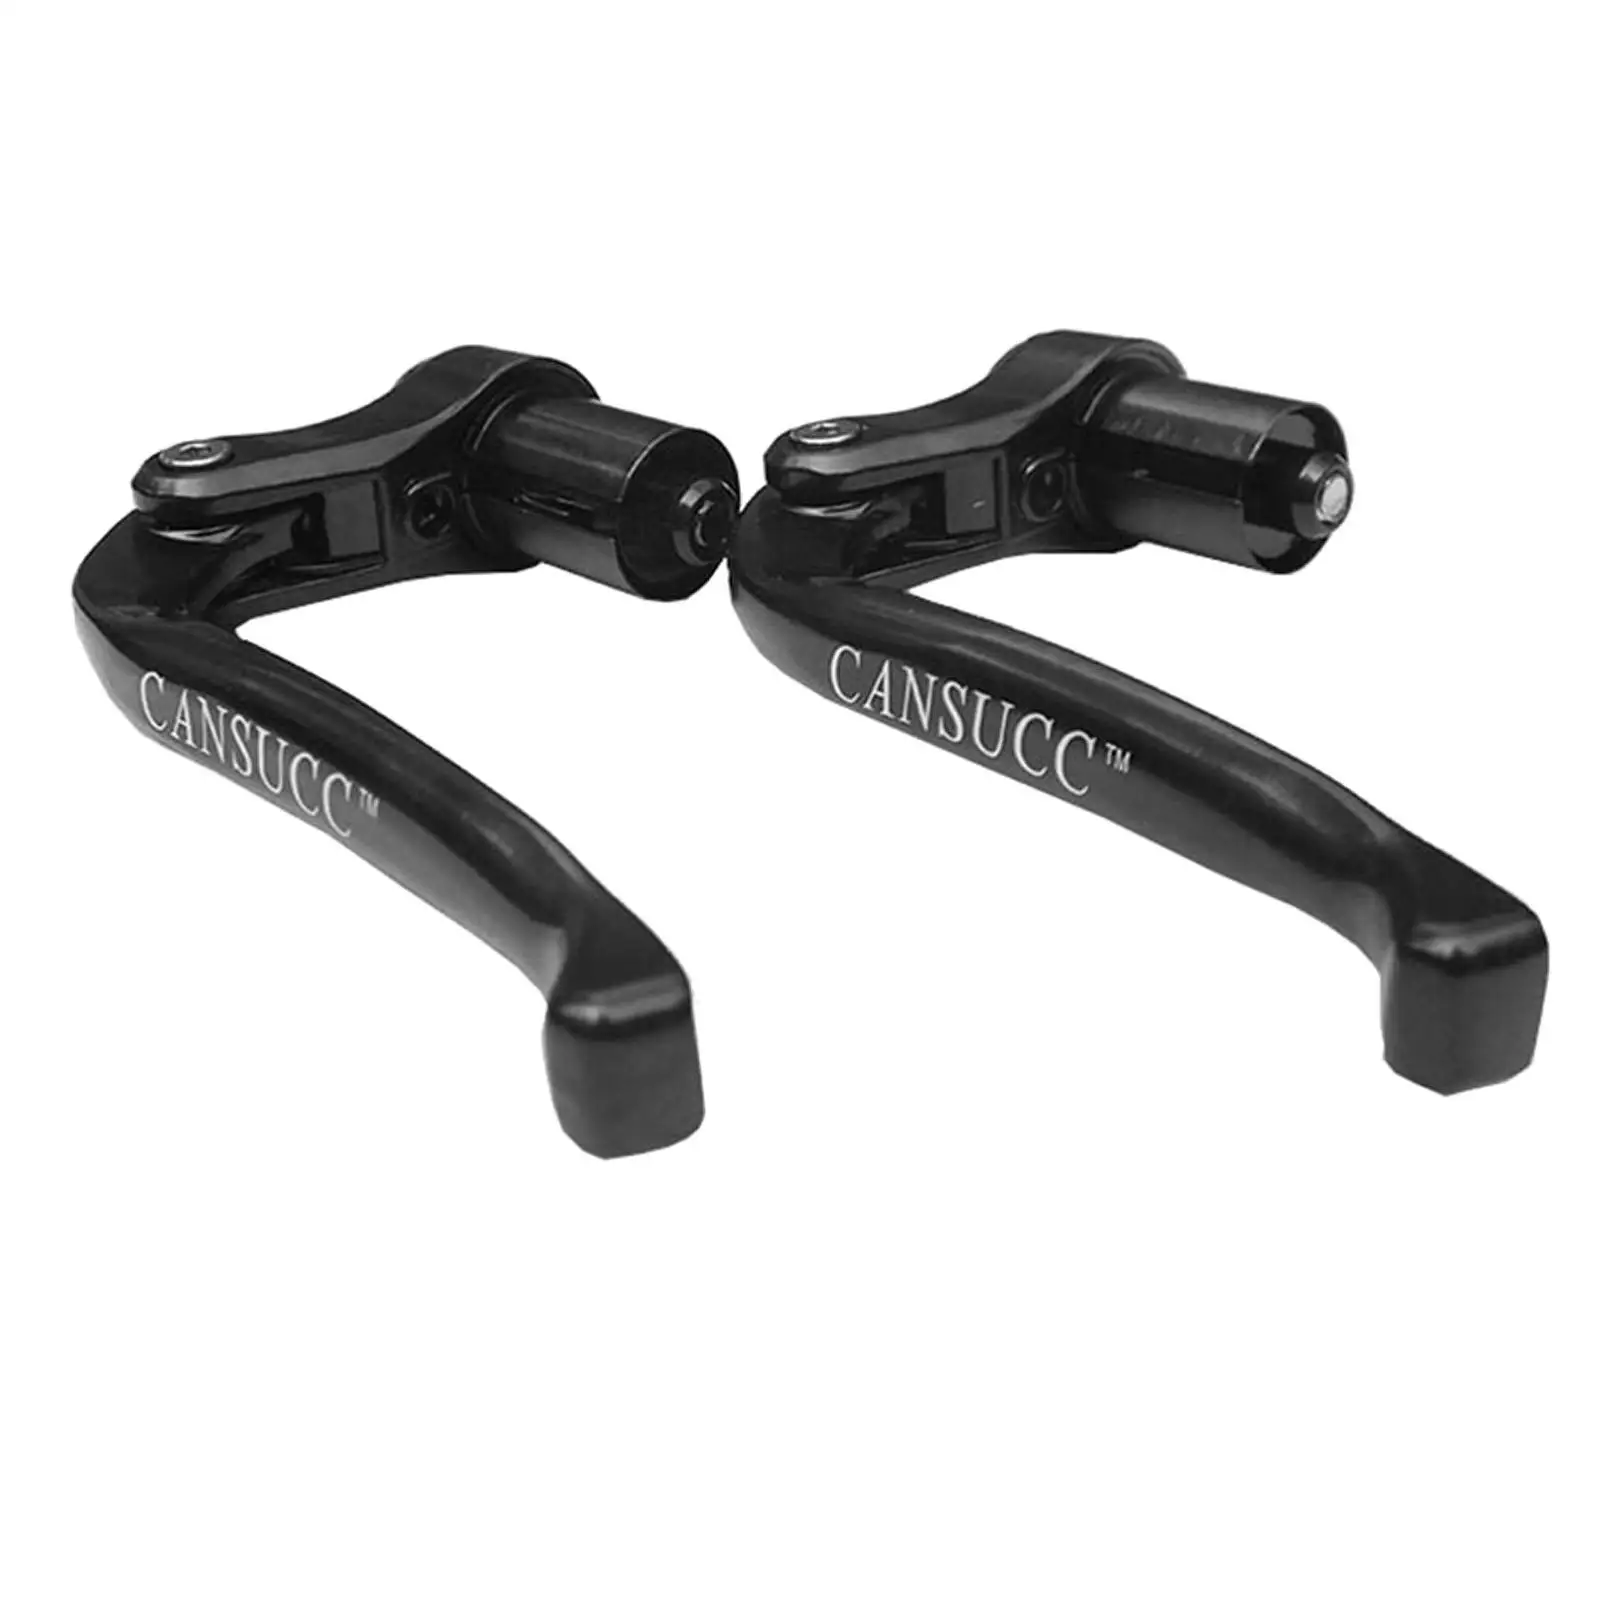 2 Pieces Bicycle Brake Levers Bar End TT Fixed Gear Handlebar Brakes Accessory